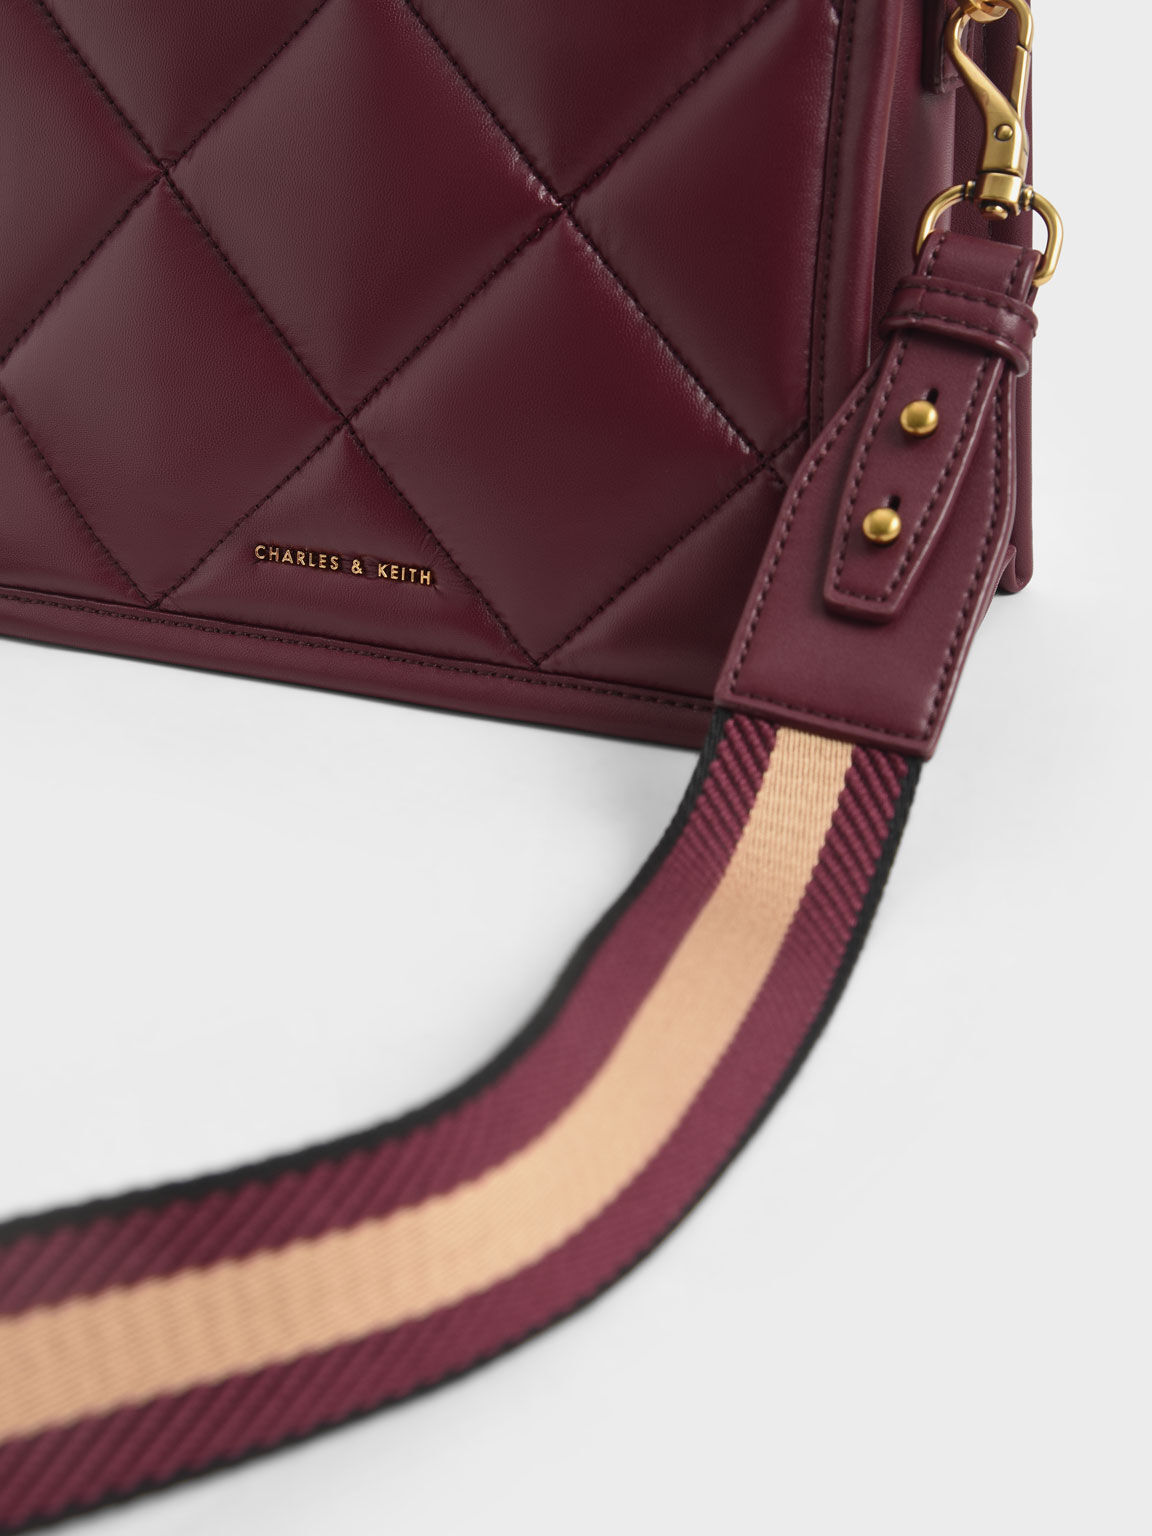 TÚI ĐEO CHÉO CHARLES KEITH QUILTED DOUBLE HANDLE TOTE BAG 22